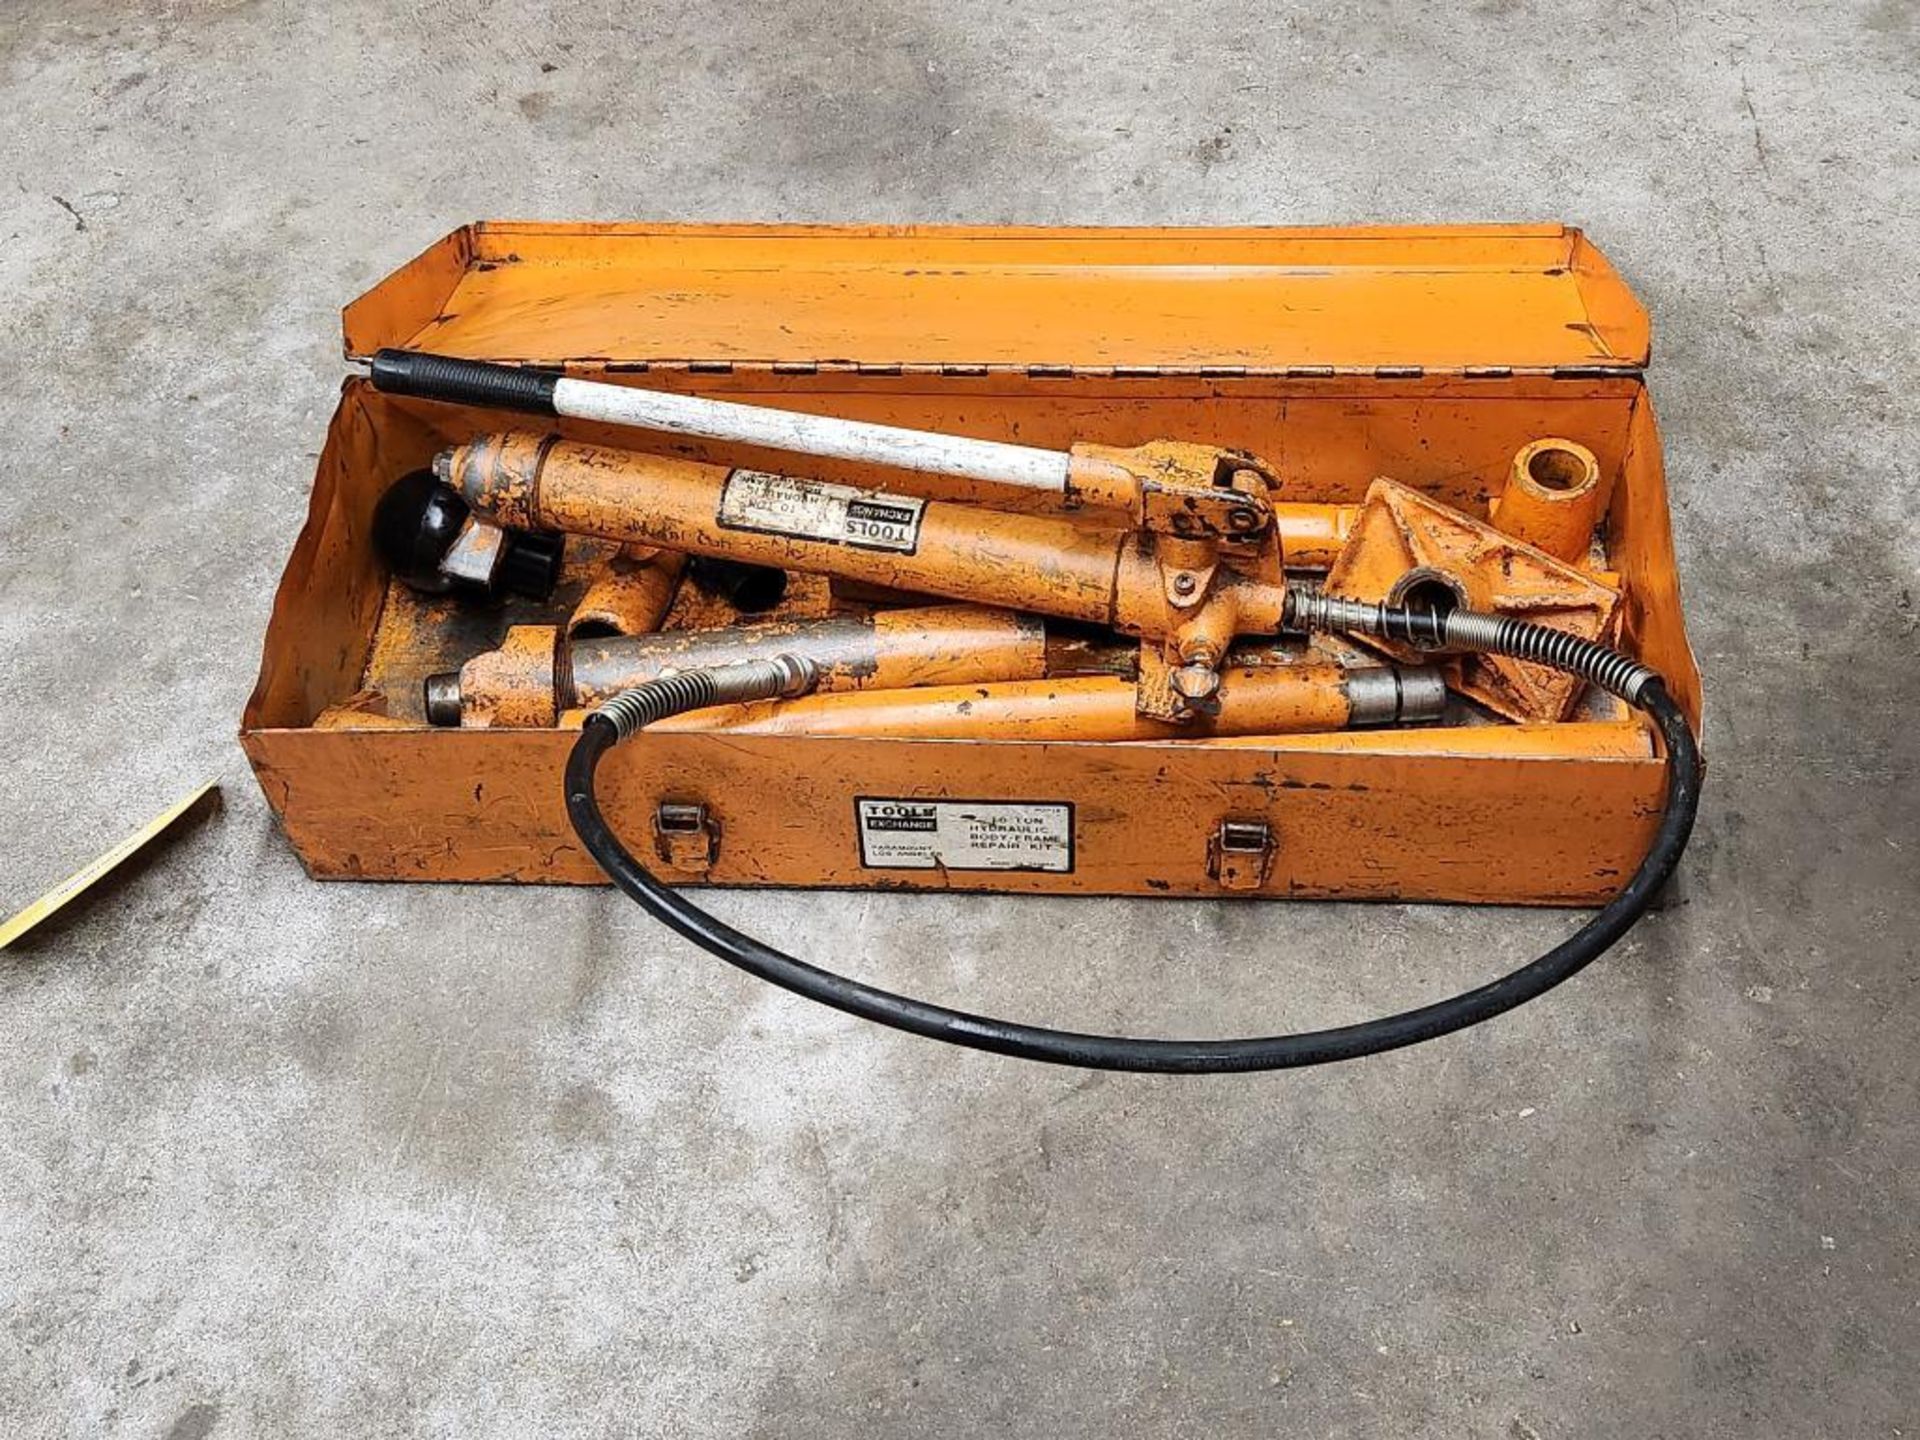 Hydraulic Hand Pump, 10-Ton, Assorted Attachments, w/ Case - Image 2 of 2